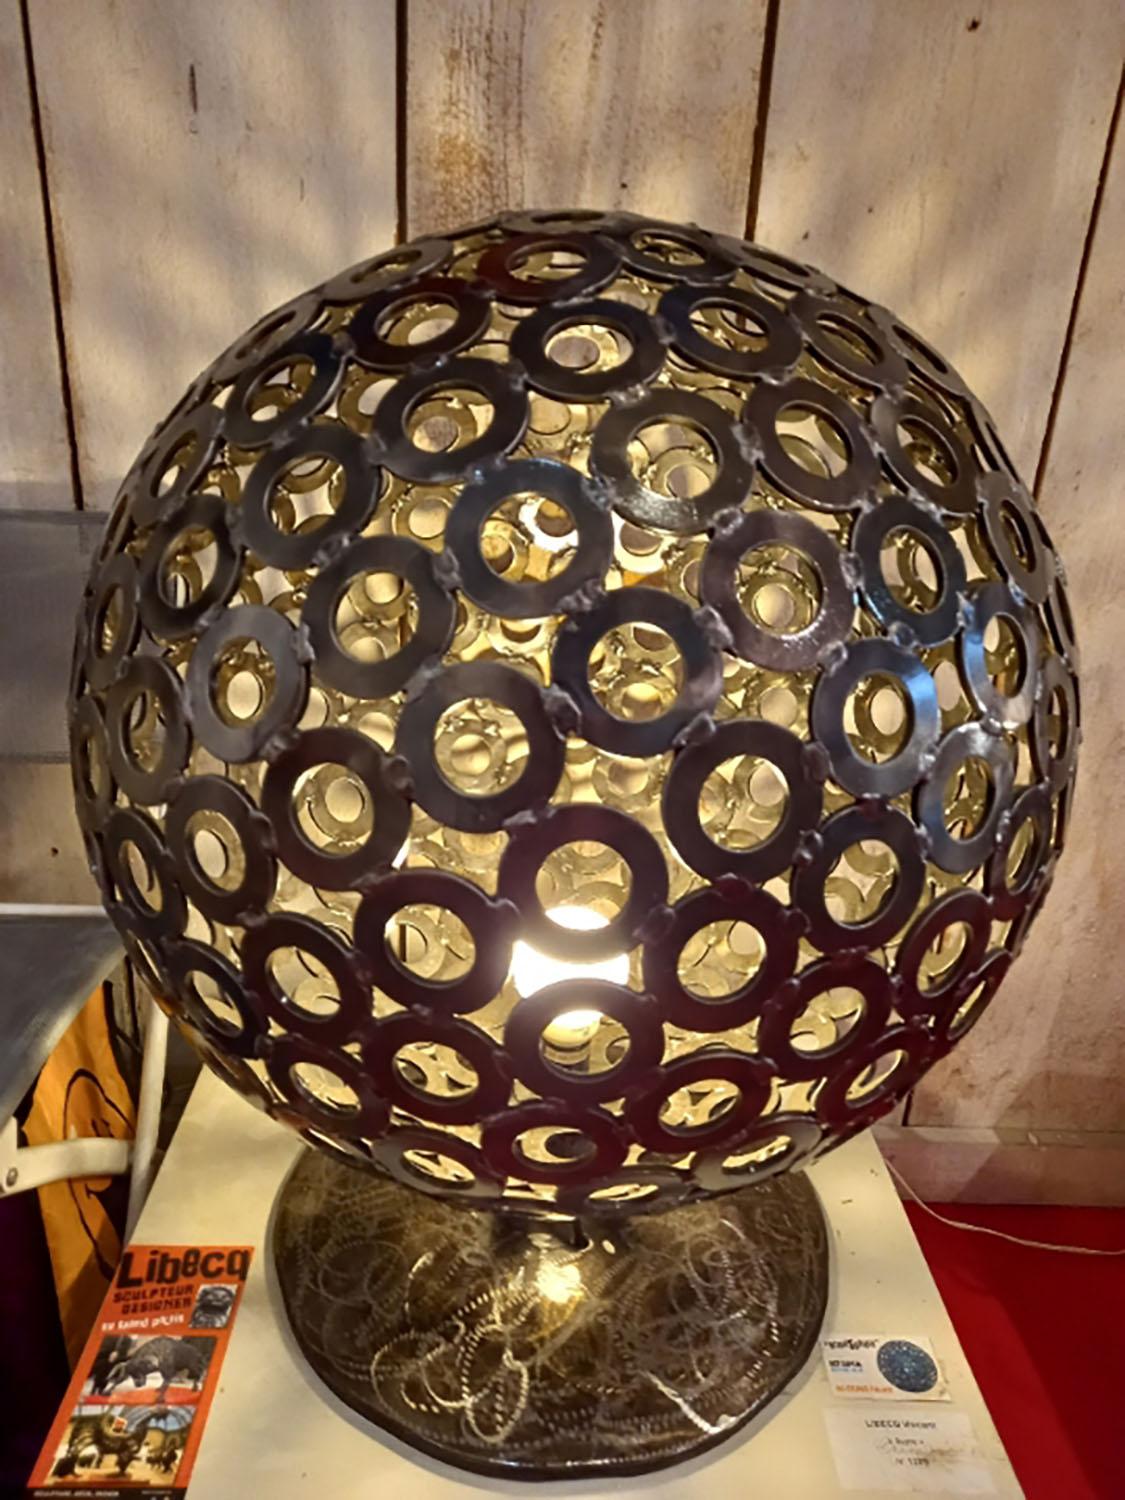 Mobile luminous sphere by LIBECQ
Mobile openwork metal 
Signed on base 
2022
Dimensions : Ø 65 cm x h 70 cm.